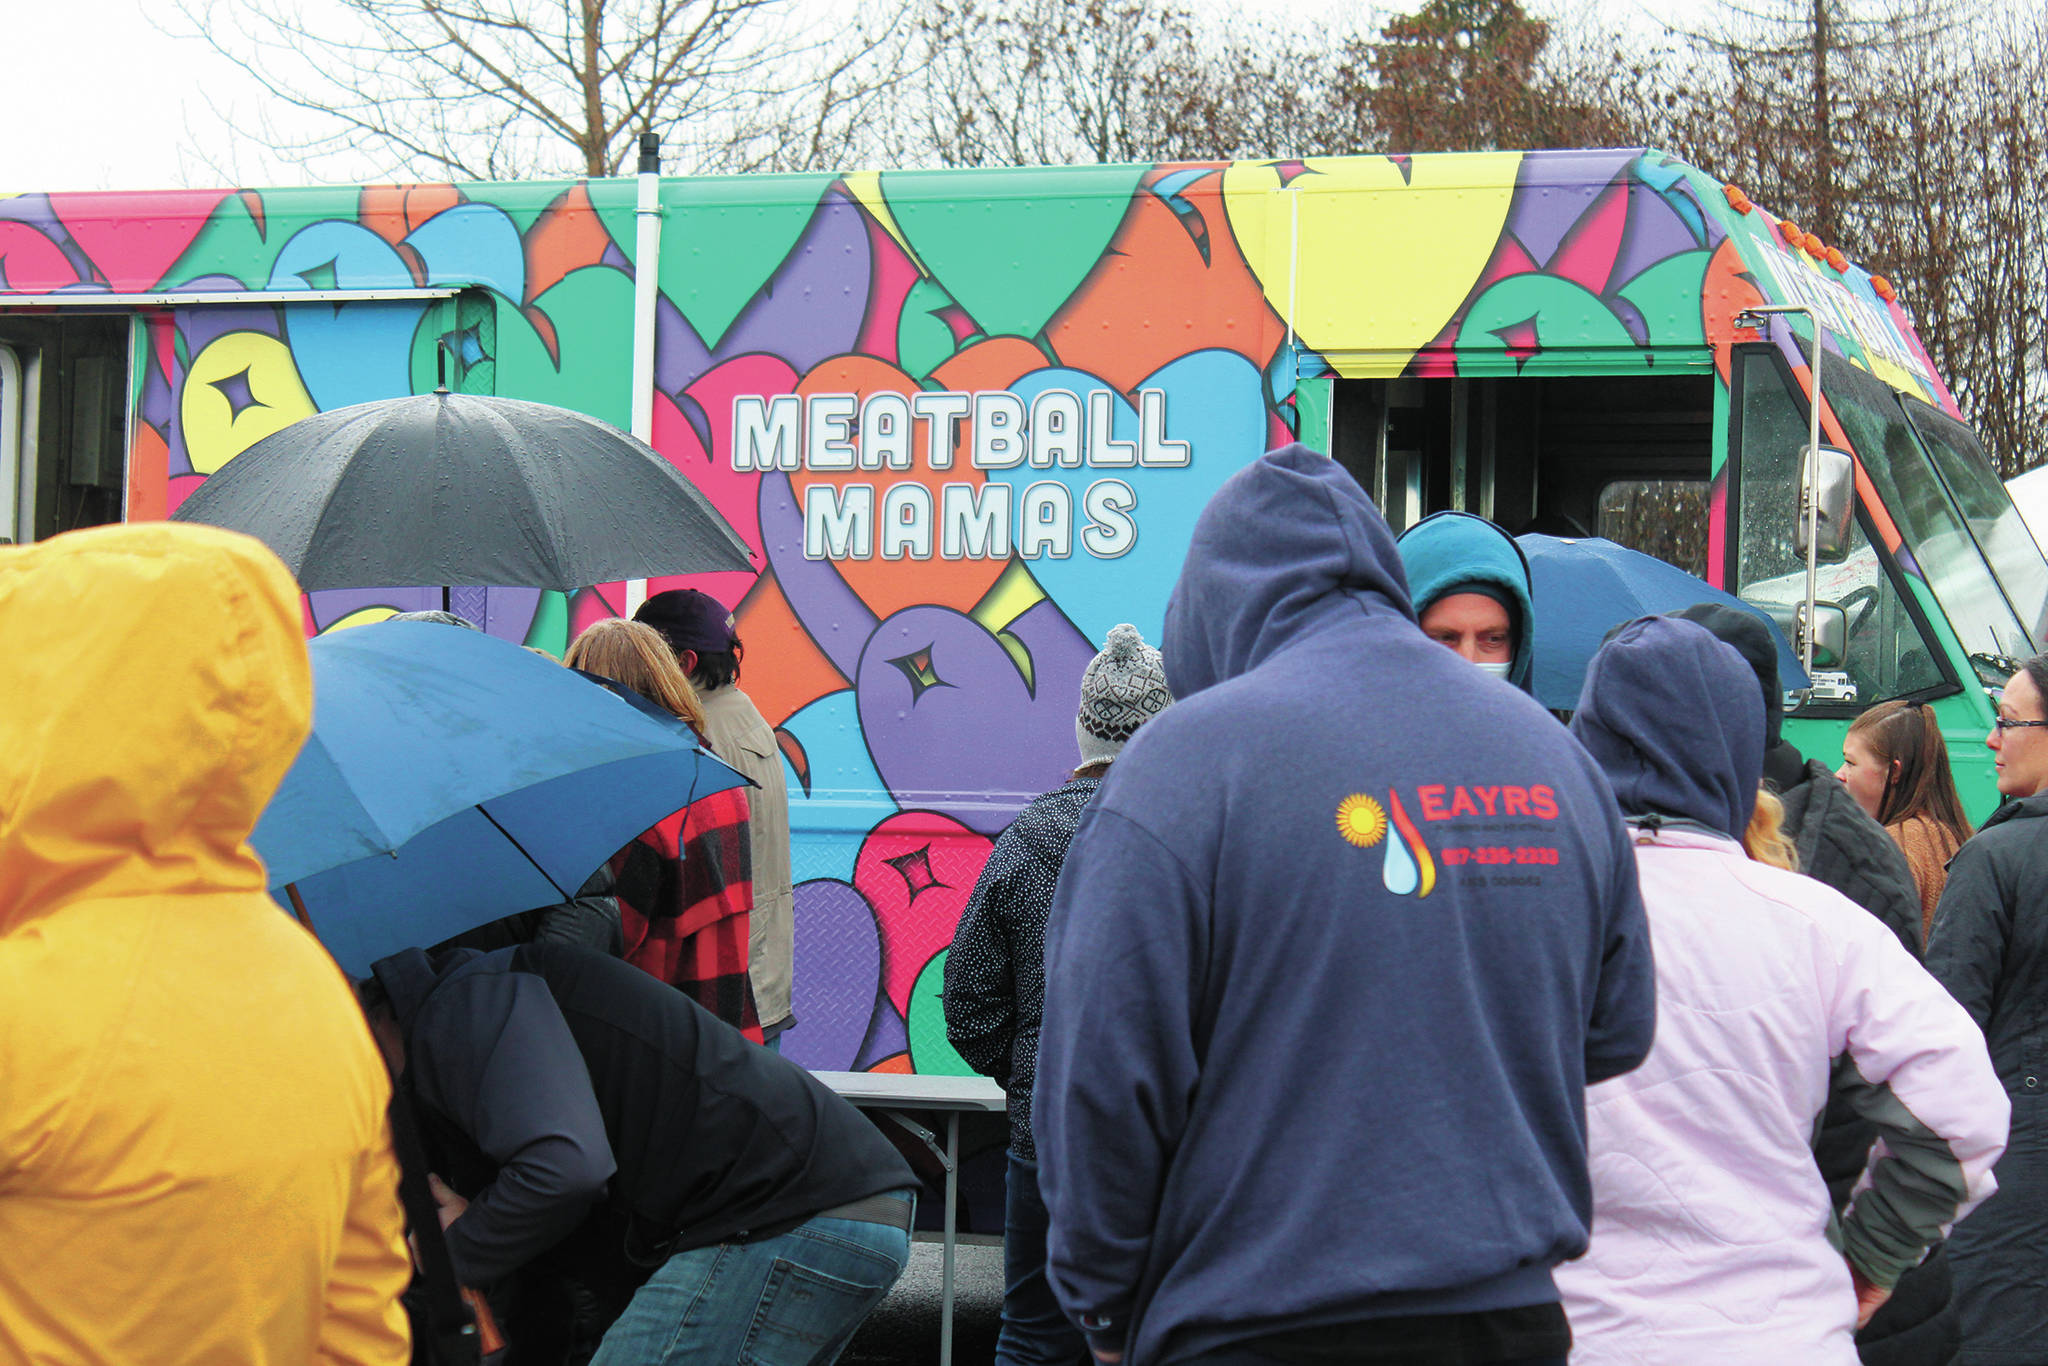 Locals wait on an overcast and rainy day to eat from the Meatball Mamas food truck on Sunday, Nov. 8, 2020 at the Homer Chamber of Commerce & Visitor Center in Homer, Alaska. The food truck was in town along with four others as part of the Food Network show “The Great Food Truck Race.” (Photo by Megan Pacer/Homer News)